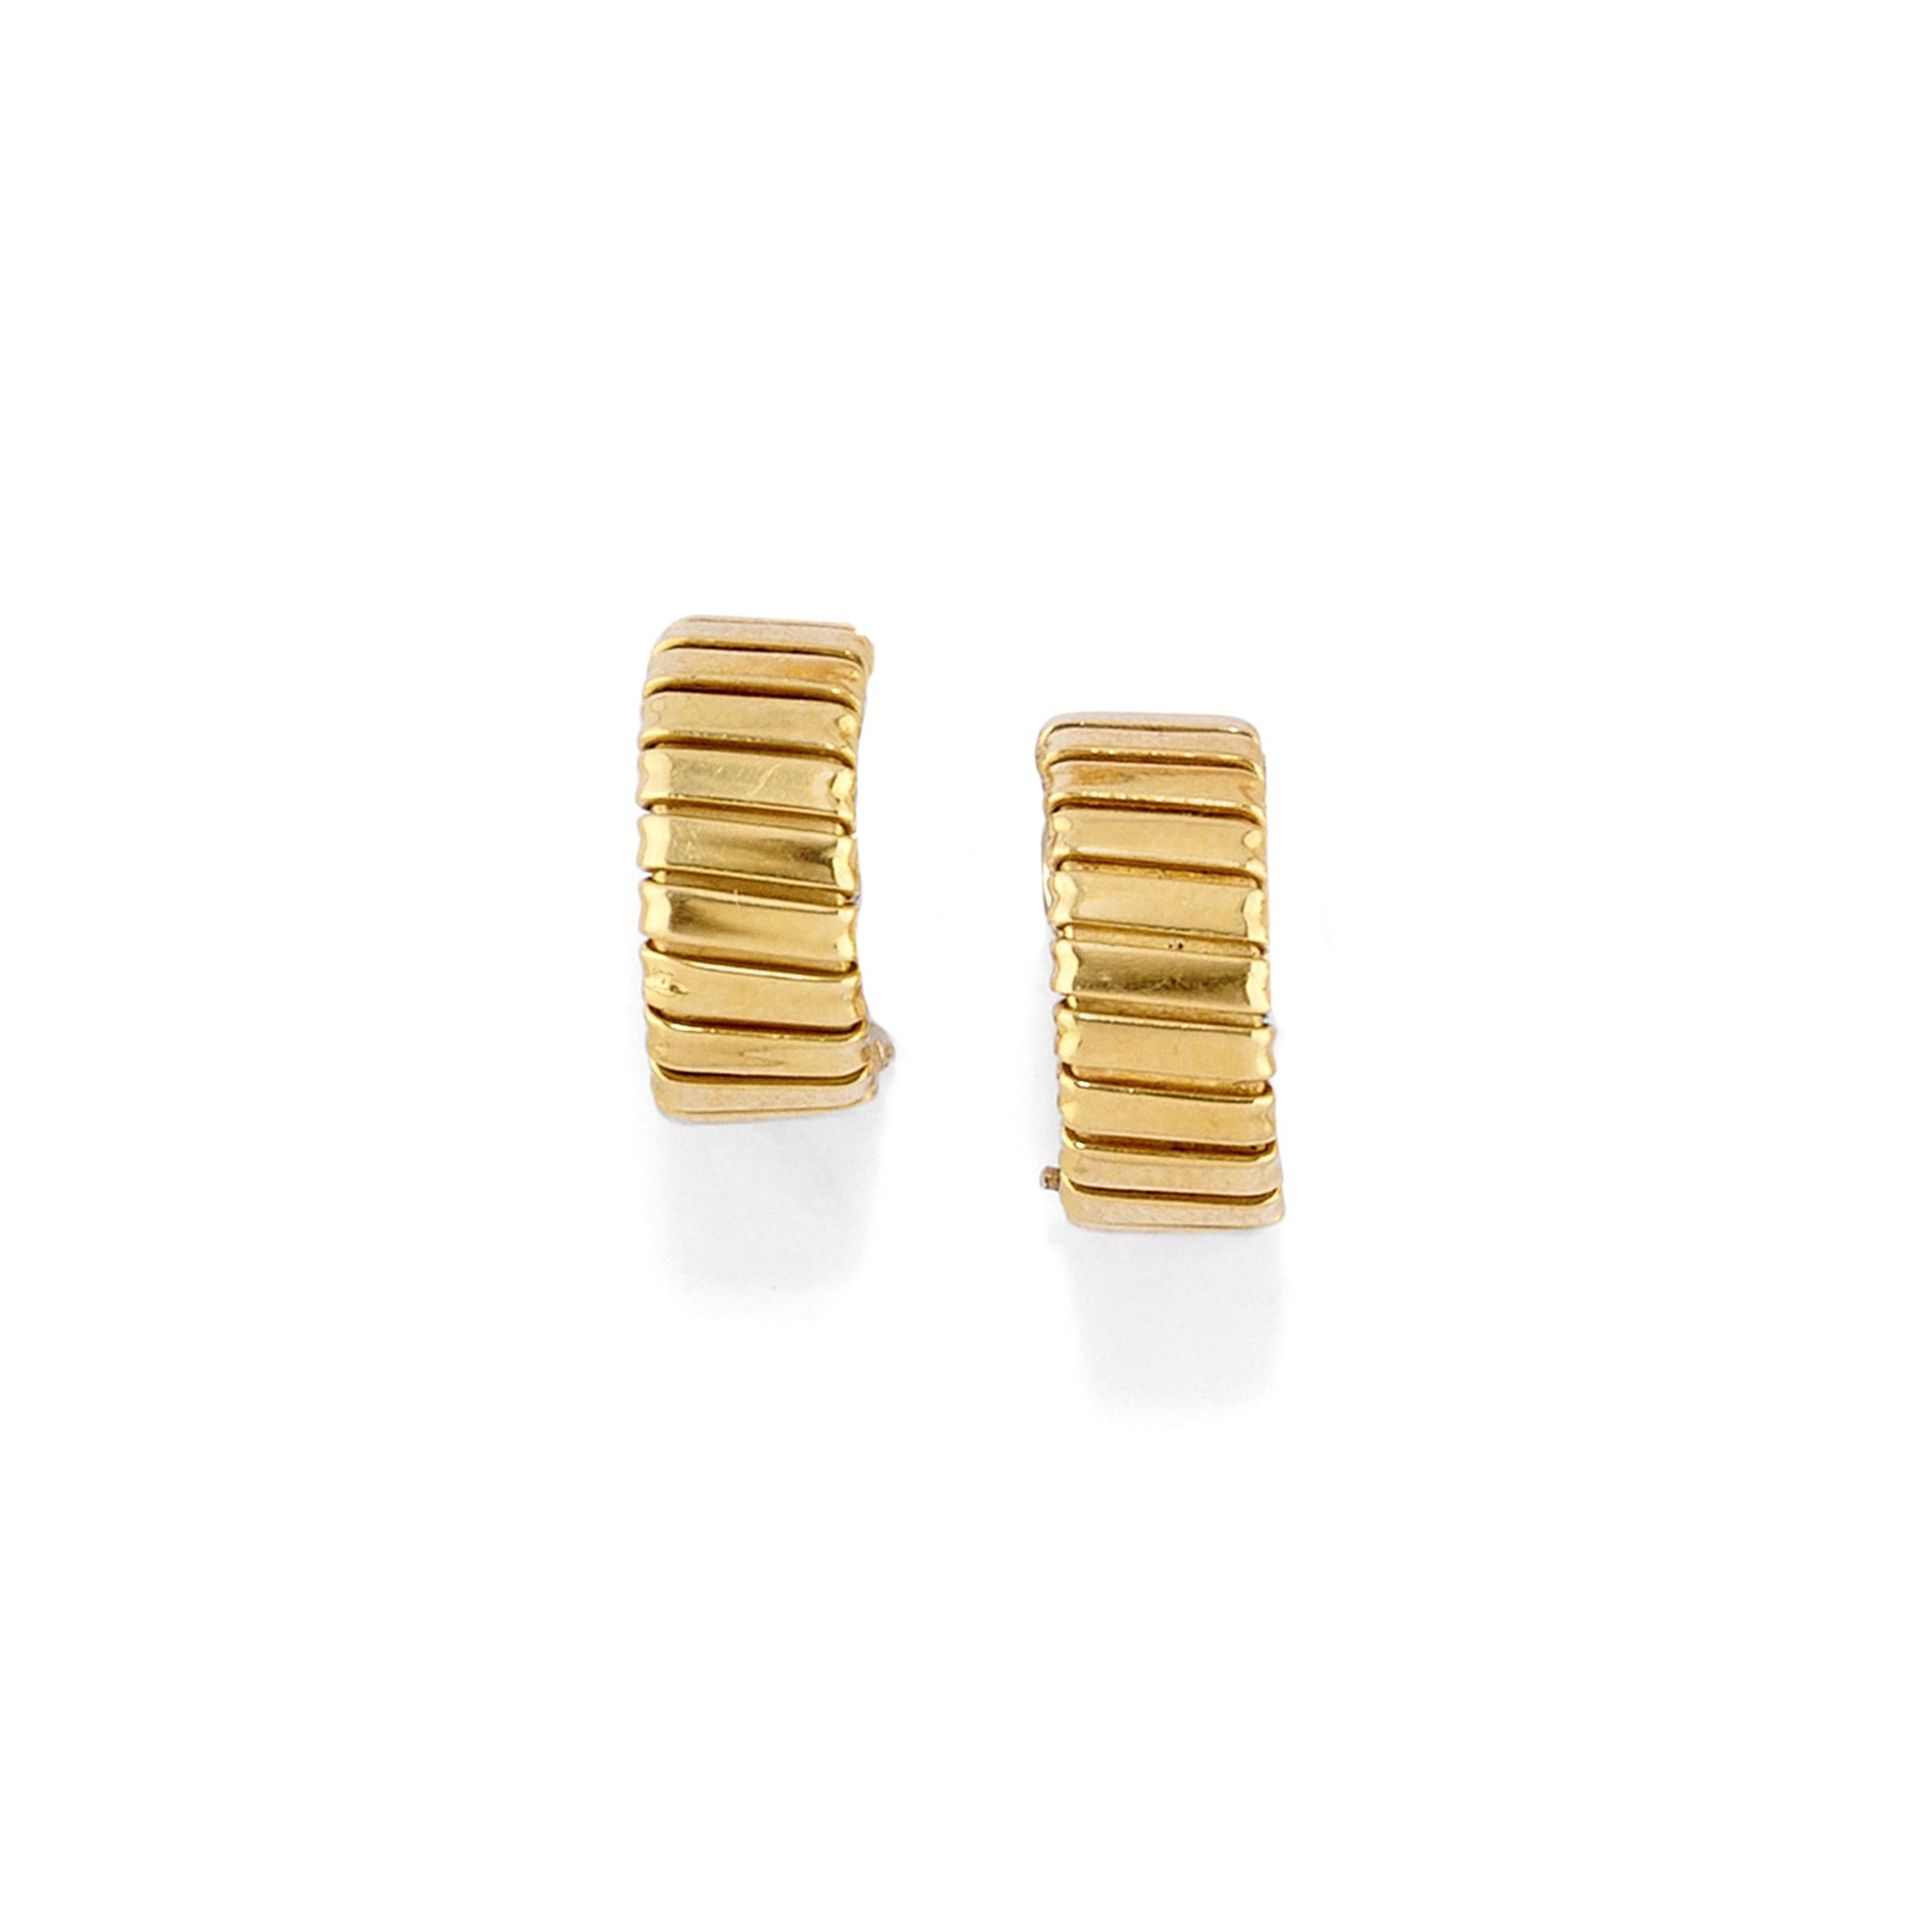 Null A 18k yellow gold earclips


Peso g 8.80 cm 1.40x1.60